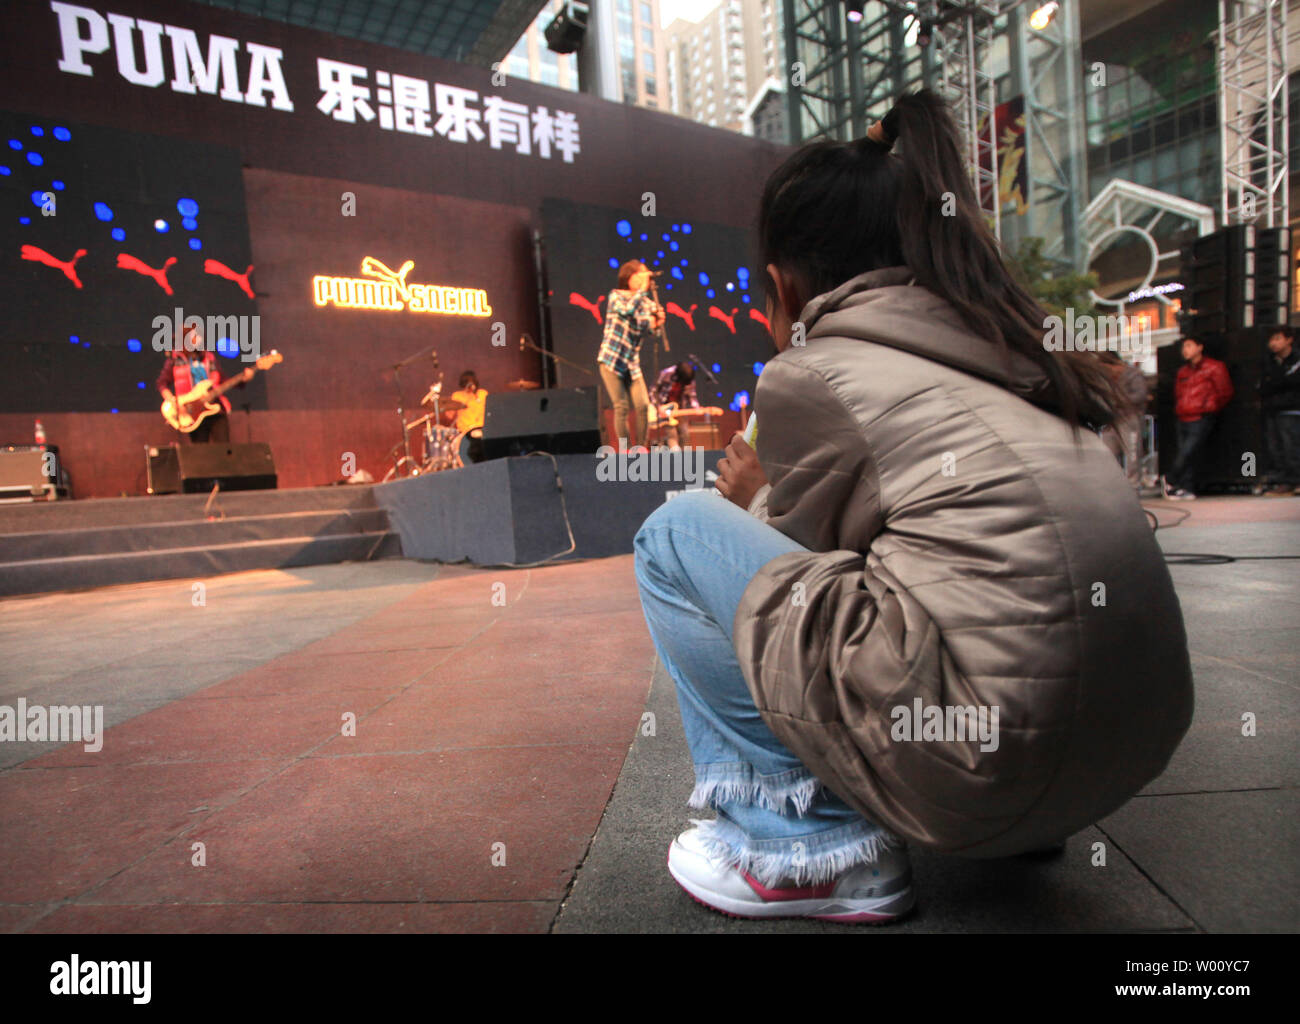 A Chinese rock band hired by Puma, a leading sports lifestyle company,  plays American music covers during a public marketing event at an  international fashion mall in Beijing November 5, 2011. Foreign